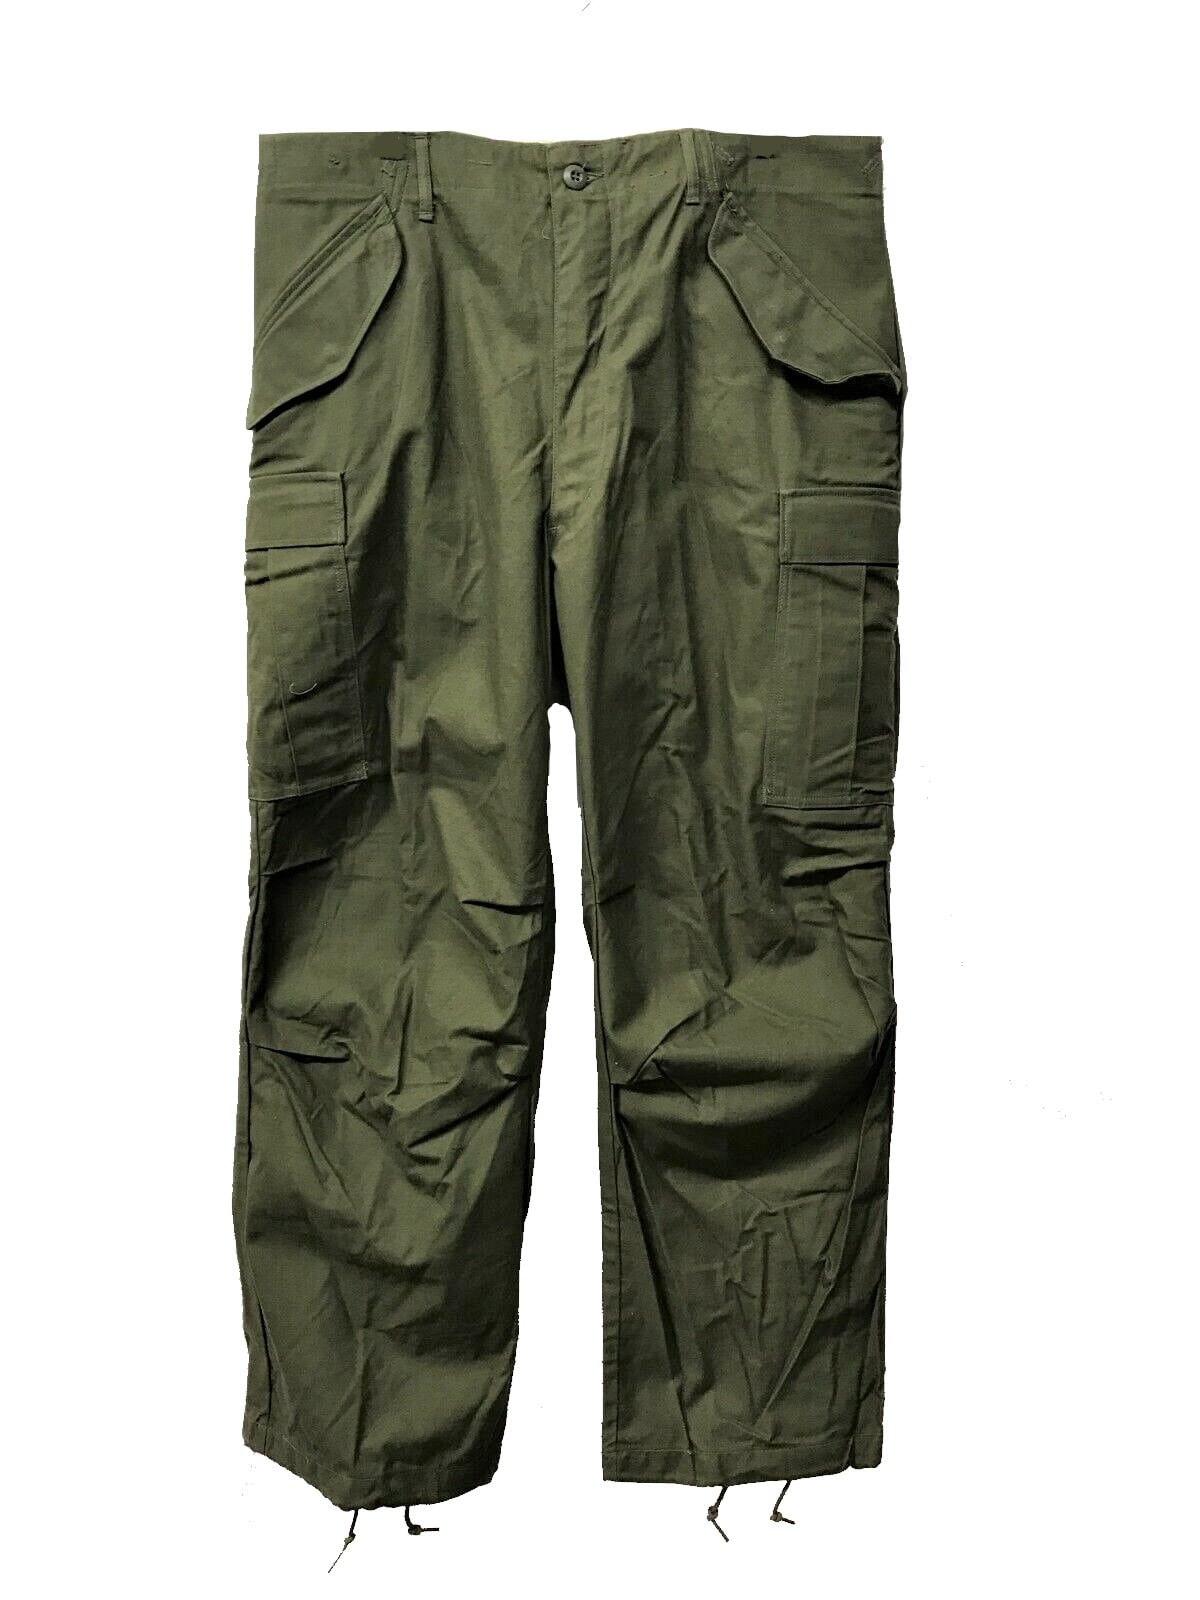 US ARMY M-65 FIELD TROUSERS